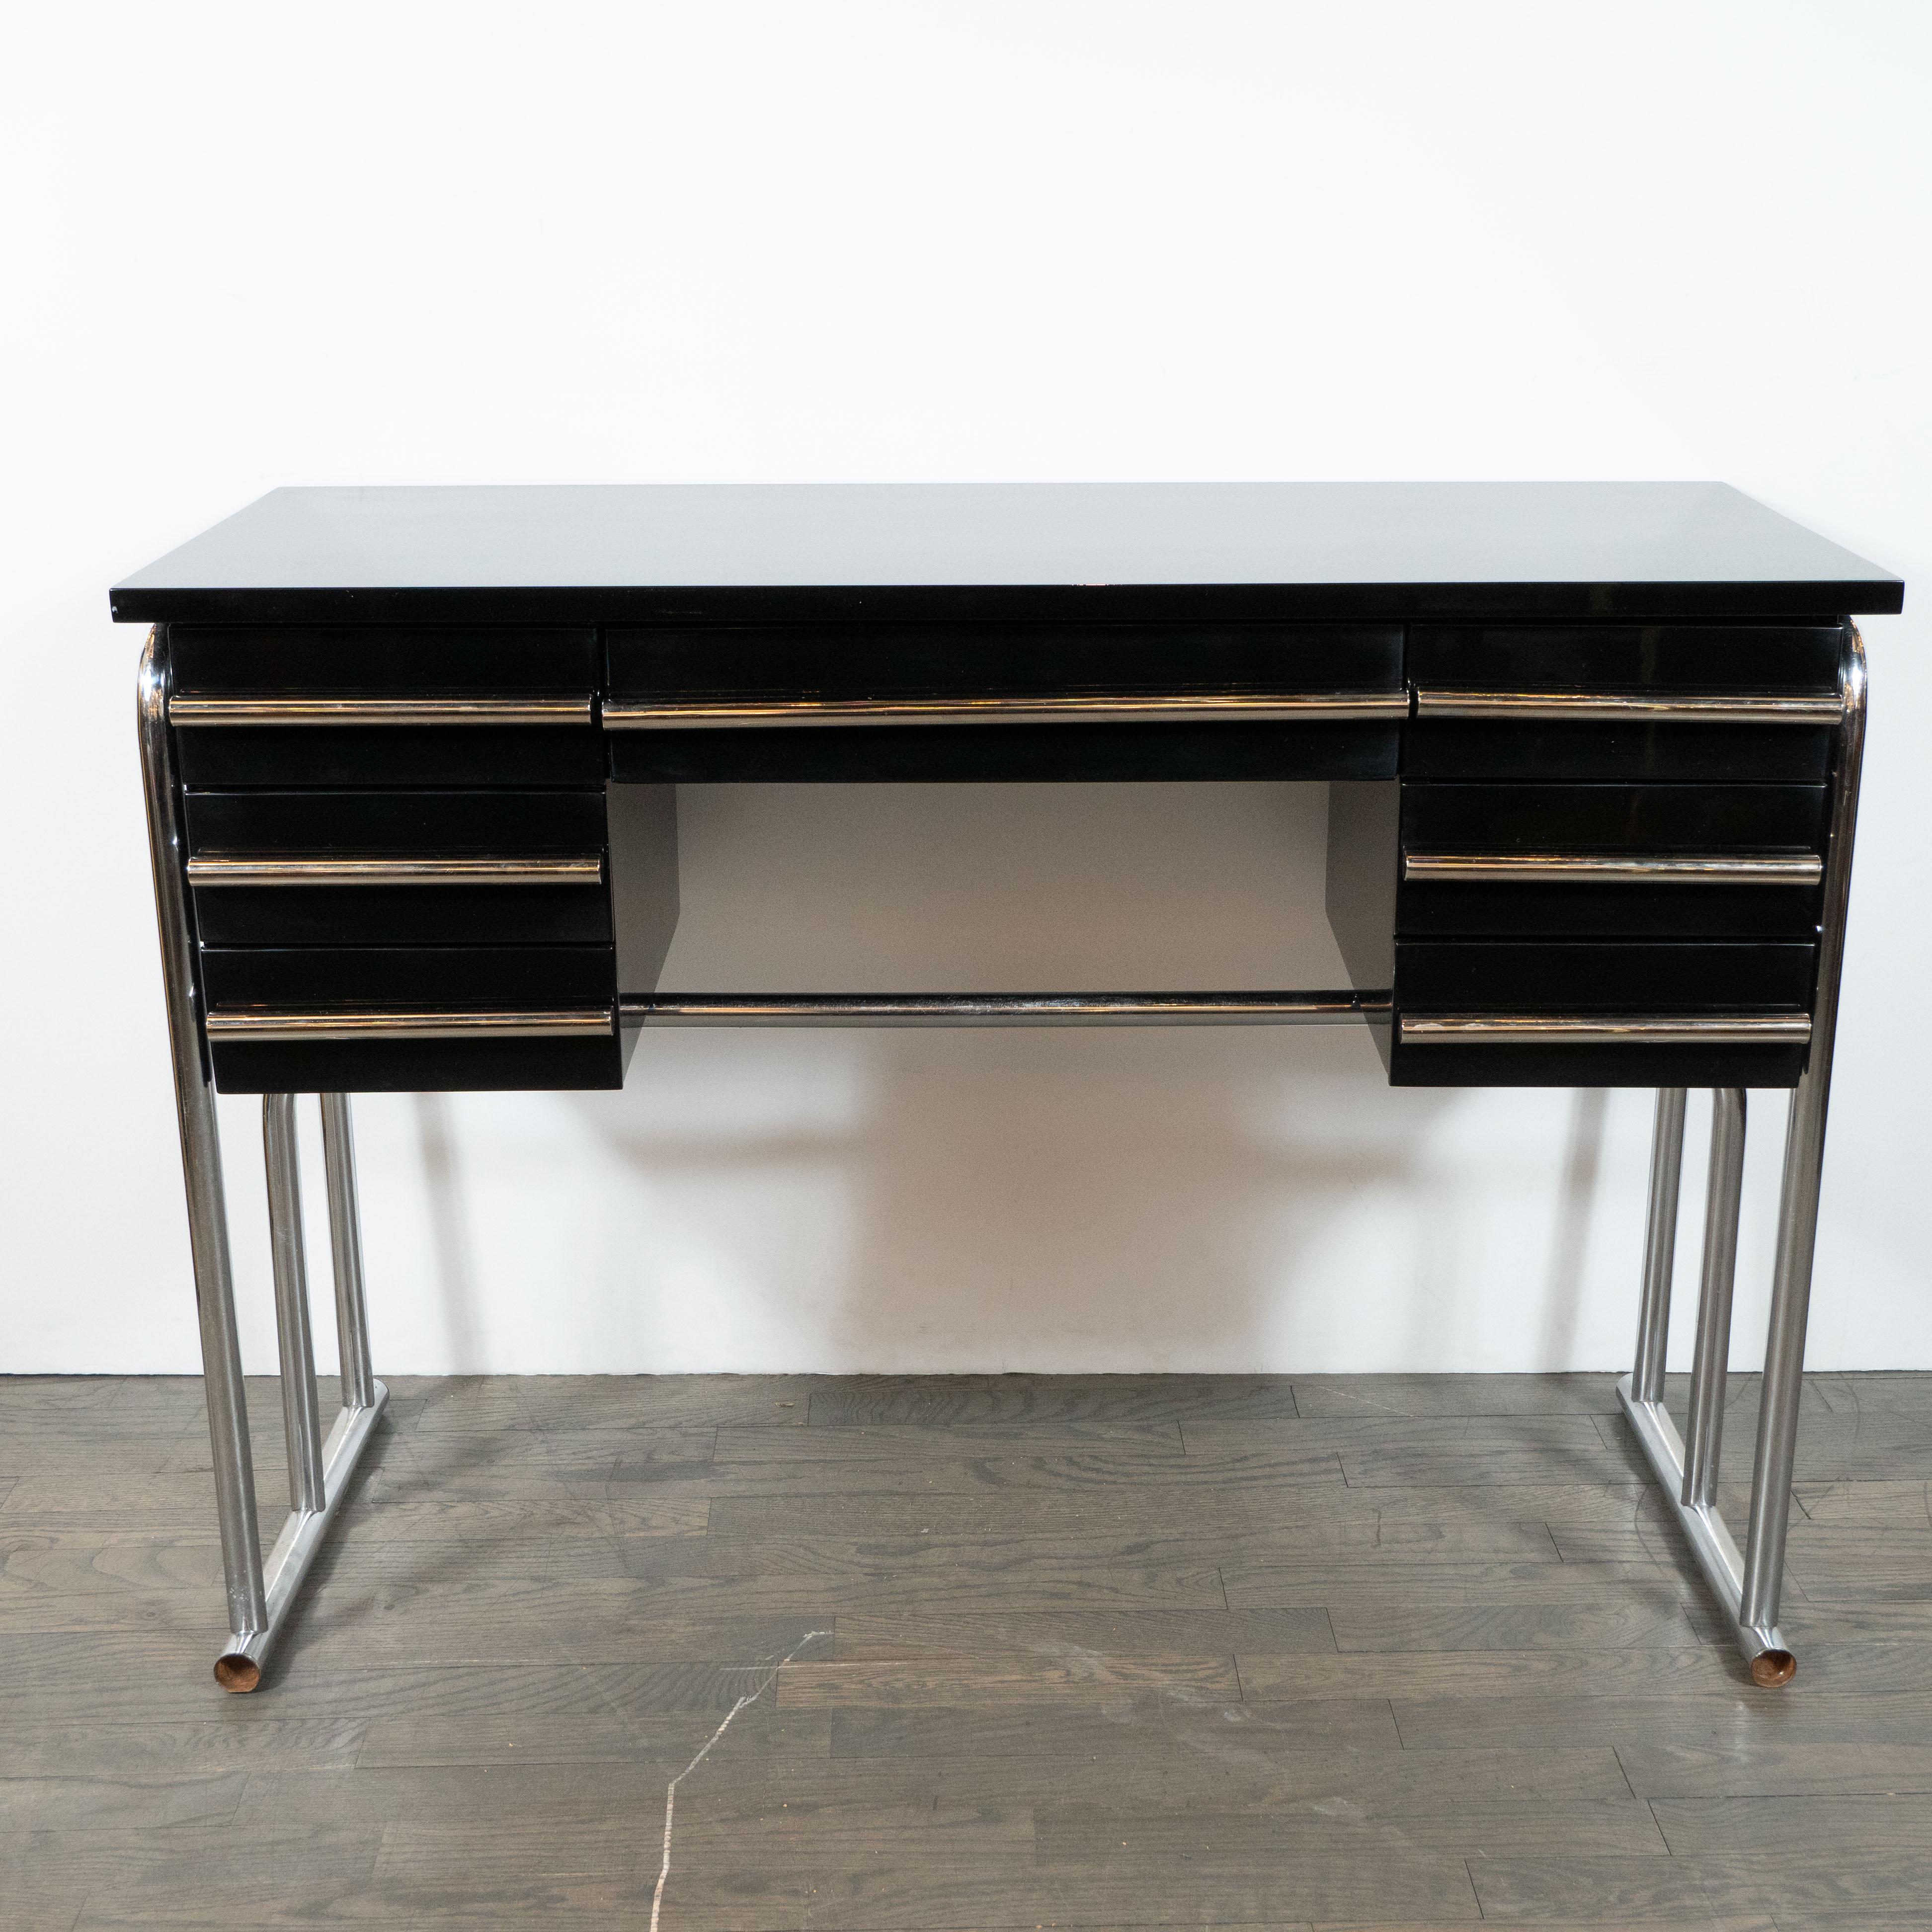 This elegant Art Deco Machine Age desk or vanity in the style of Gilbert Rohde. It features a rectilinear body with a rectangular top, a central drawer and three drawers on each side with cylindrical streamlined chrome pulls- offering a wealth of